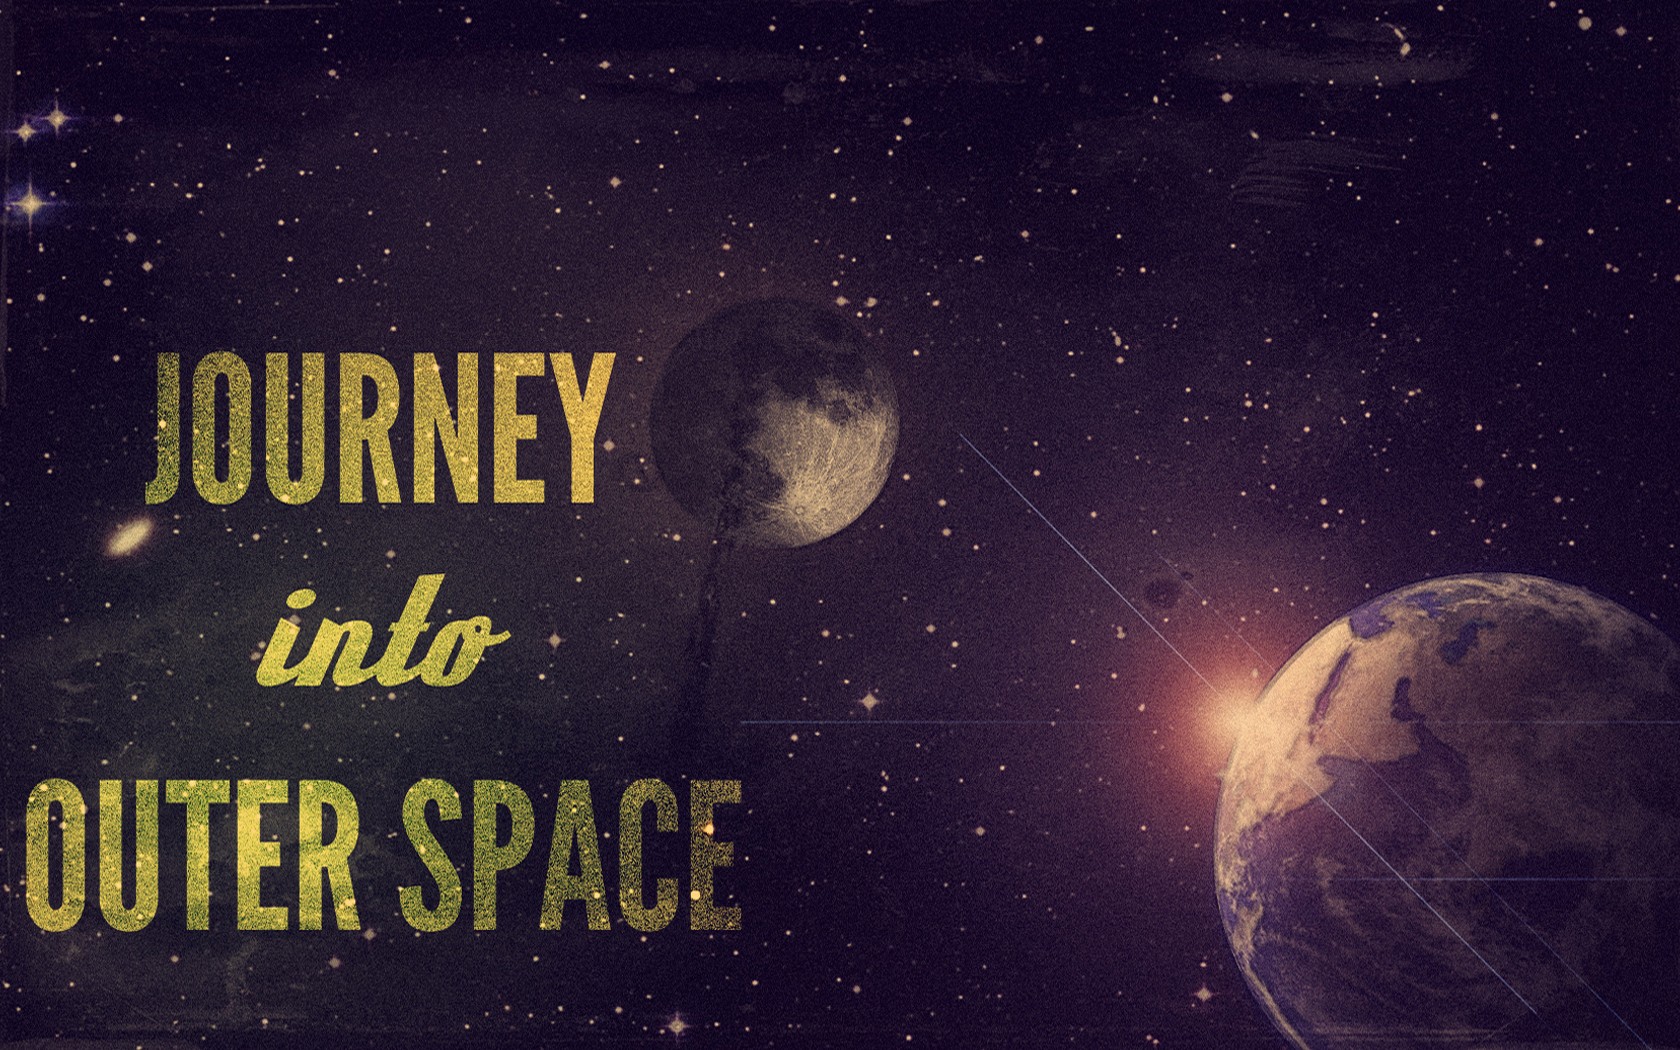 science, Fiction, Vintage, Planets, Retro, Earth, Oldschool, Journey, Inspirational, Posters, Space Wallpaper